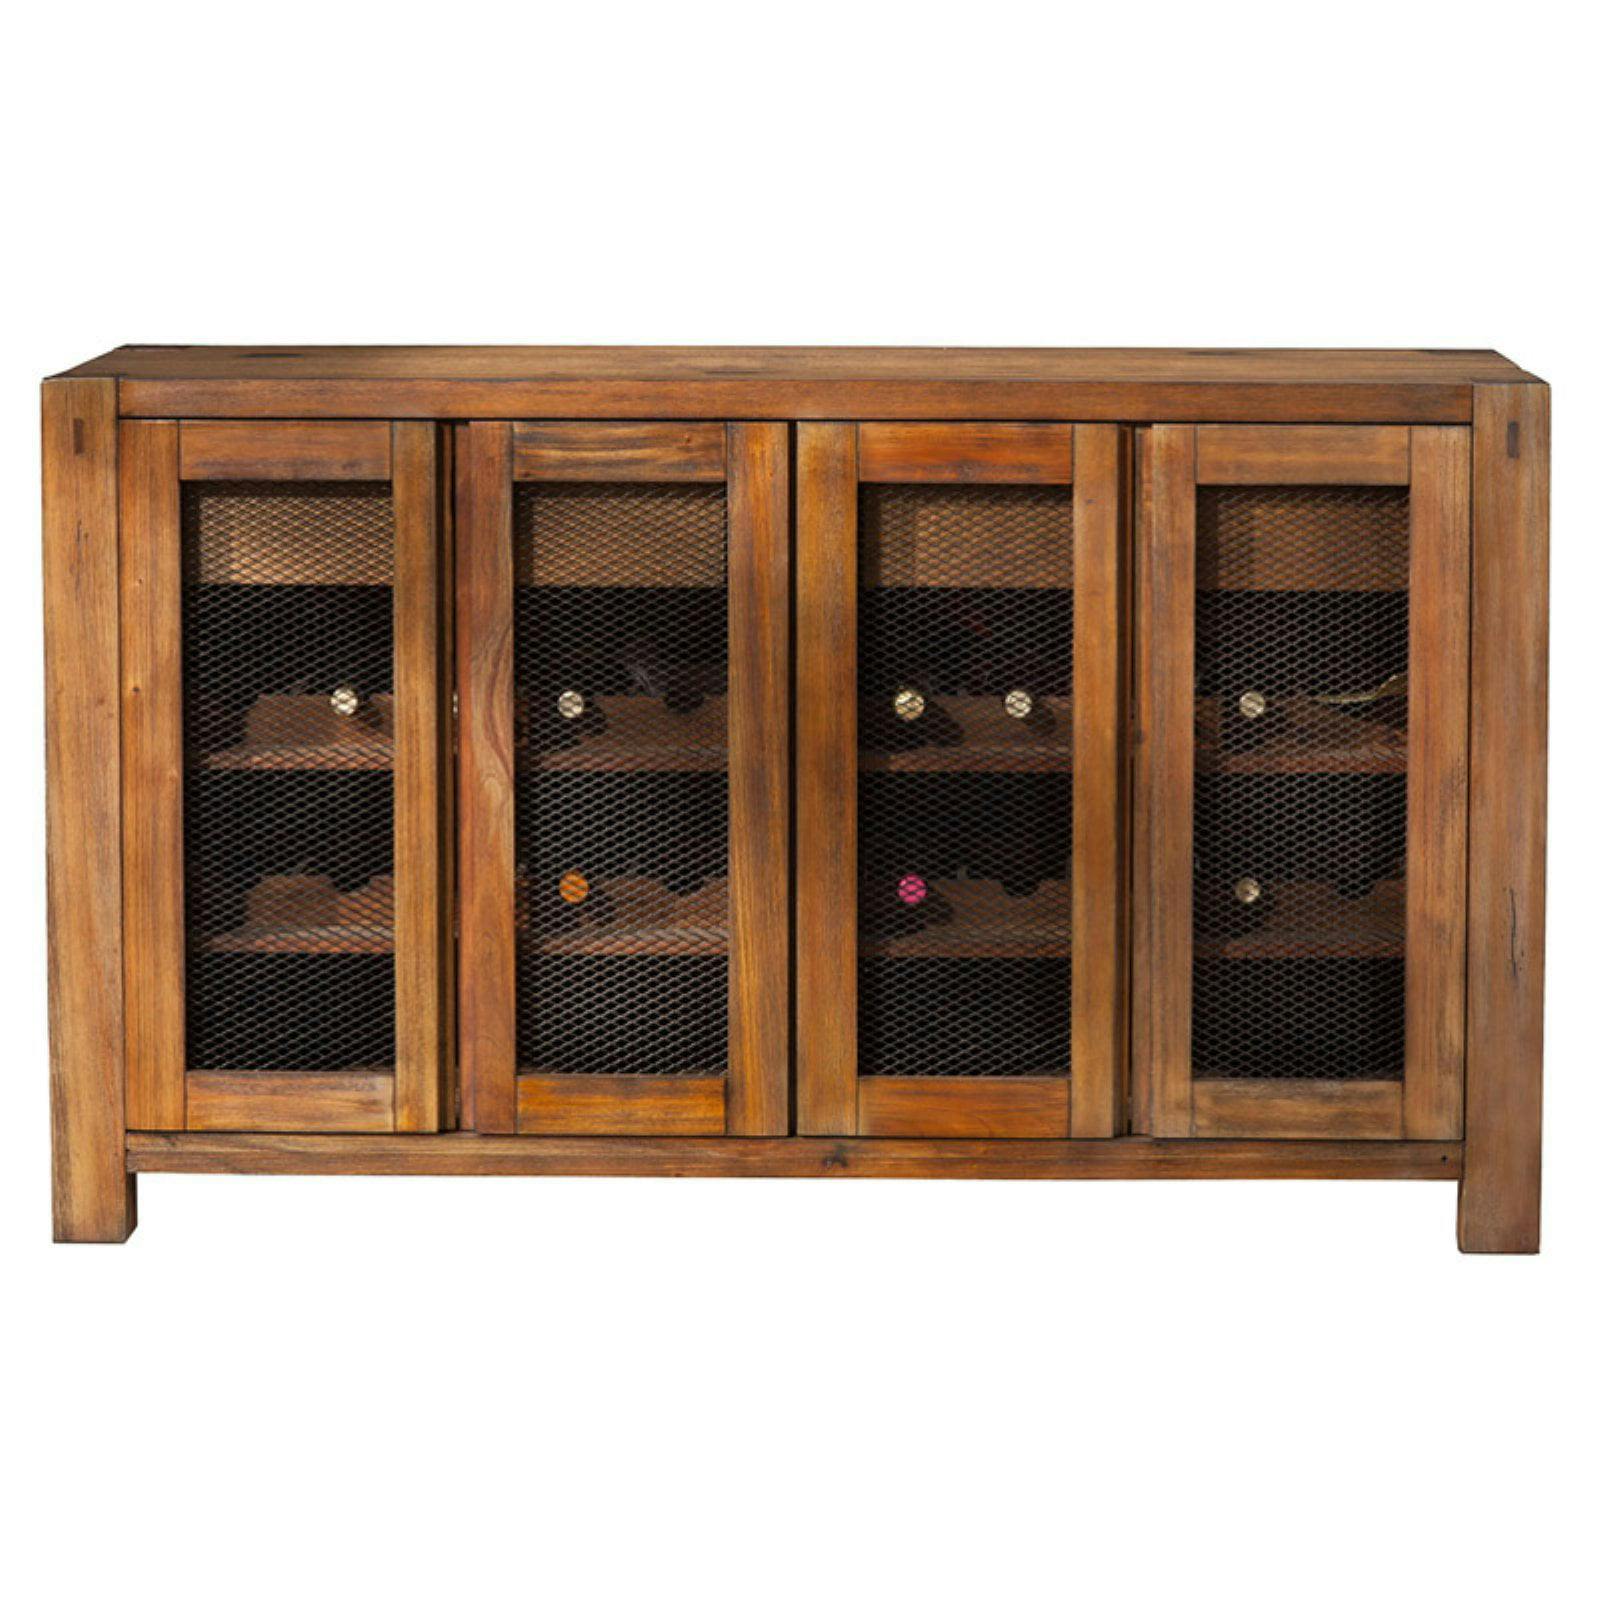 Salvaged Mahogany 58" Rustic Sideboard with Wine Storage